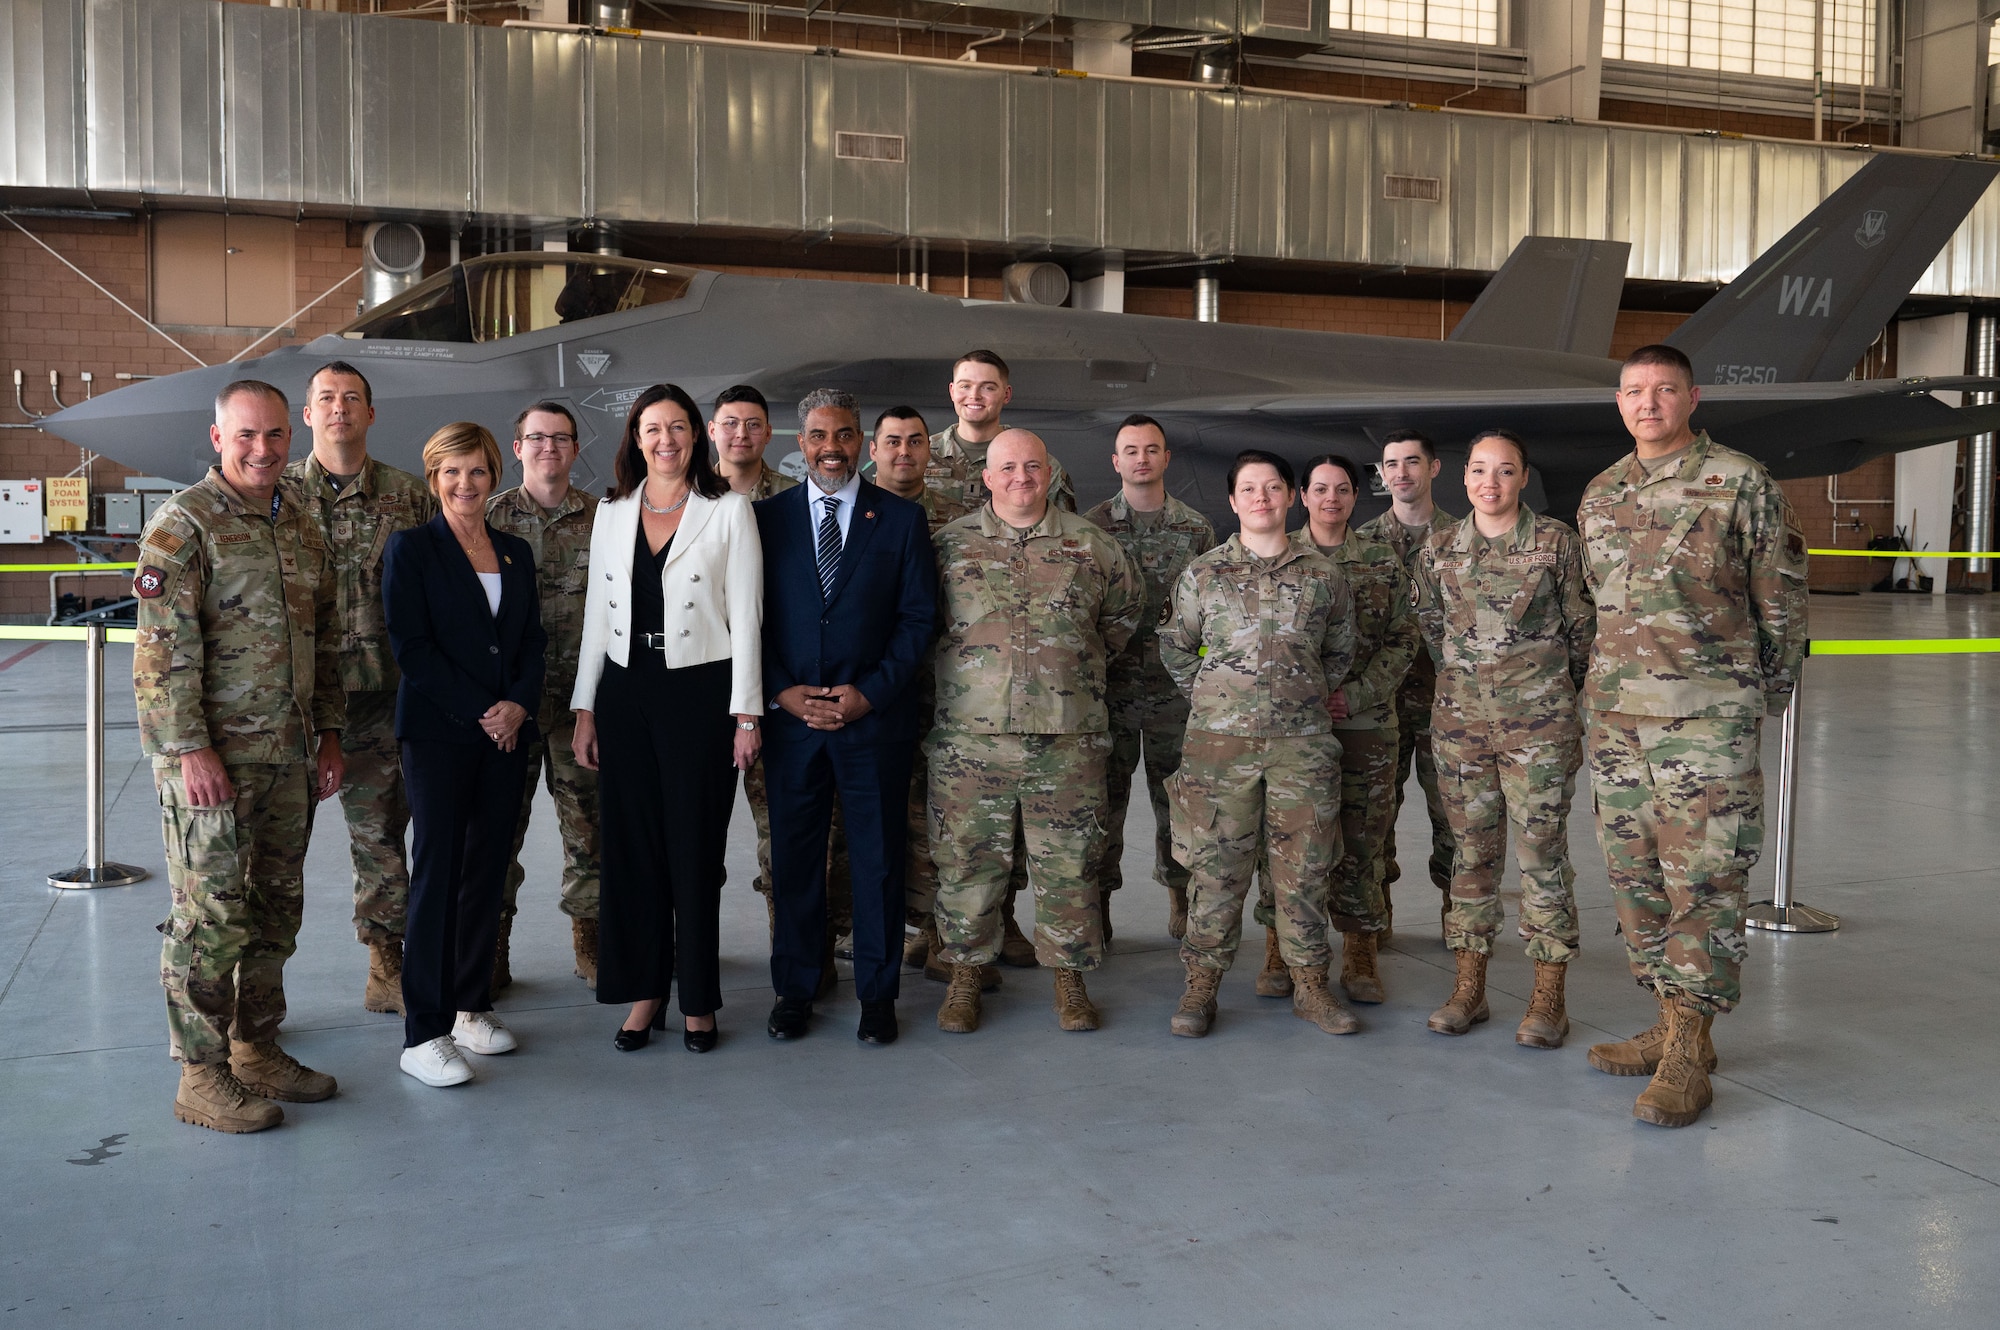 Acting USECAF visits Nellis AFB > Air Force > Article Display